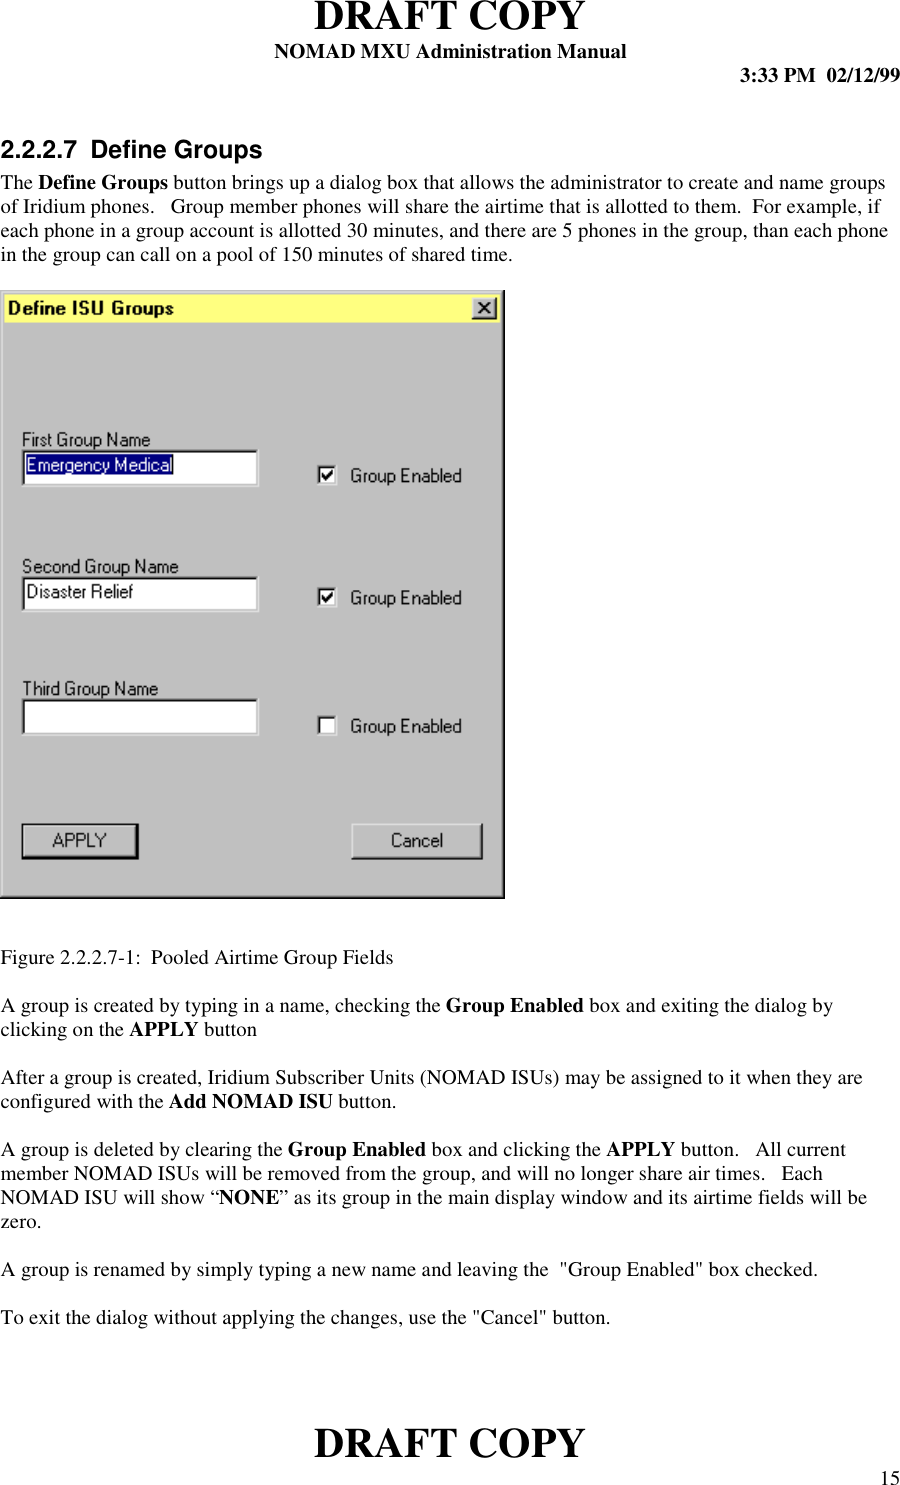 DRAFT COPYNOMAD MXU Administration Manual 3:33 PM  02/12/99DRAFT COPY 152.2.2.7 Define GroupsThe Define Groups button brings up a dialog box that allows the administrator to create and name groupsof Iridium phones.   Group member phones will share the airtime that is allotted to them.  For example, ifeach phone in a group account is allotted 30 minutes, and there are 5 phones in the group, than each phonein the group can call on a pool of 150 minutes of shared time.Figure 2.2.2.7-1:  Pooled Airtime Group FieldsA group is created by typing in a name, checking the Group Enabled box and exiting the dialog byclicking on the APPLY buttonAfter a group is created, Iridium Subscriber Units (NOMAD ISUs) may be assigned to it when they areconfigured with the Add NOMAD ISU button.A group is deleted by clearing the Group Enabled box and clicking the APPLY button.   All currentmember NOMAD ISUs will be removed from the group, and will no longer share air times.   EachNOMAD ISU will show “NONE” as its group in the main display window and its airtime fields will bezero.A group is renamed by simply typing a new name and leaving the  &quot;Group Enabled&quot; box checked.To exit the dialog without applying the changes, use the &quot;Cancel&quot; button.